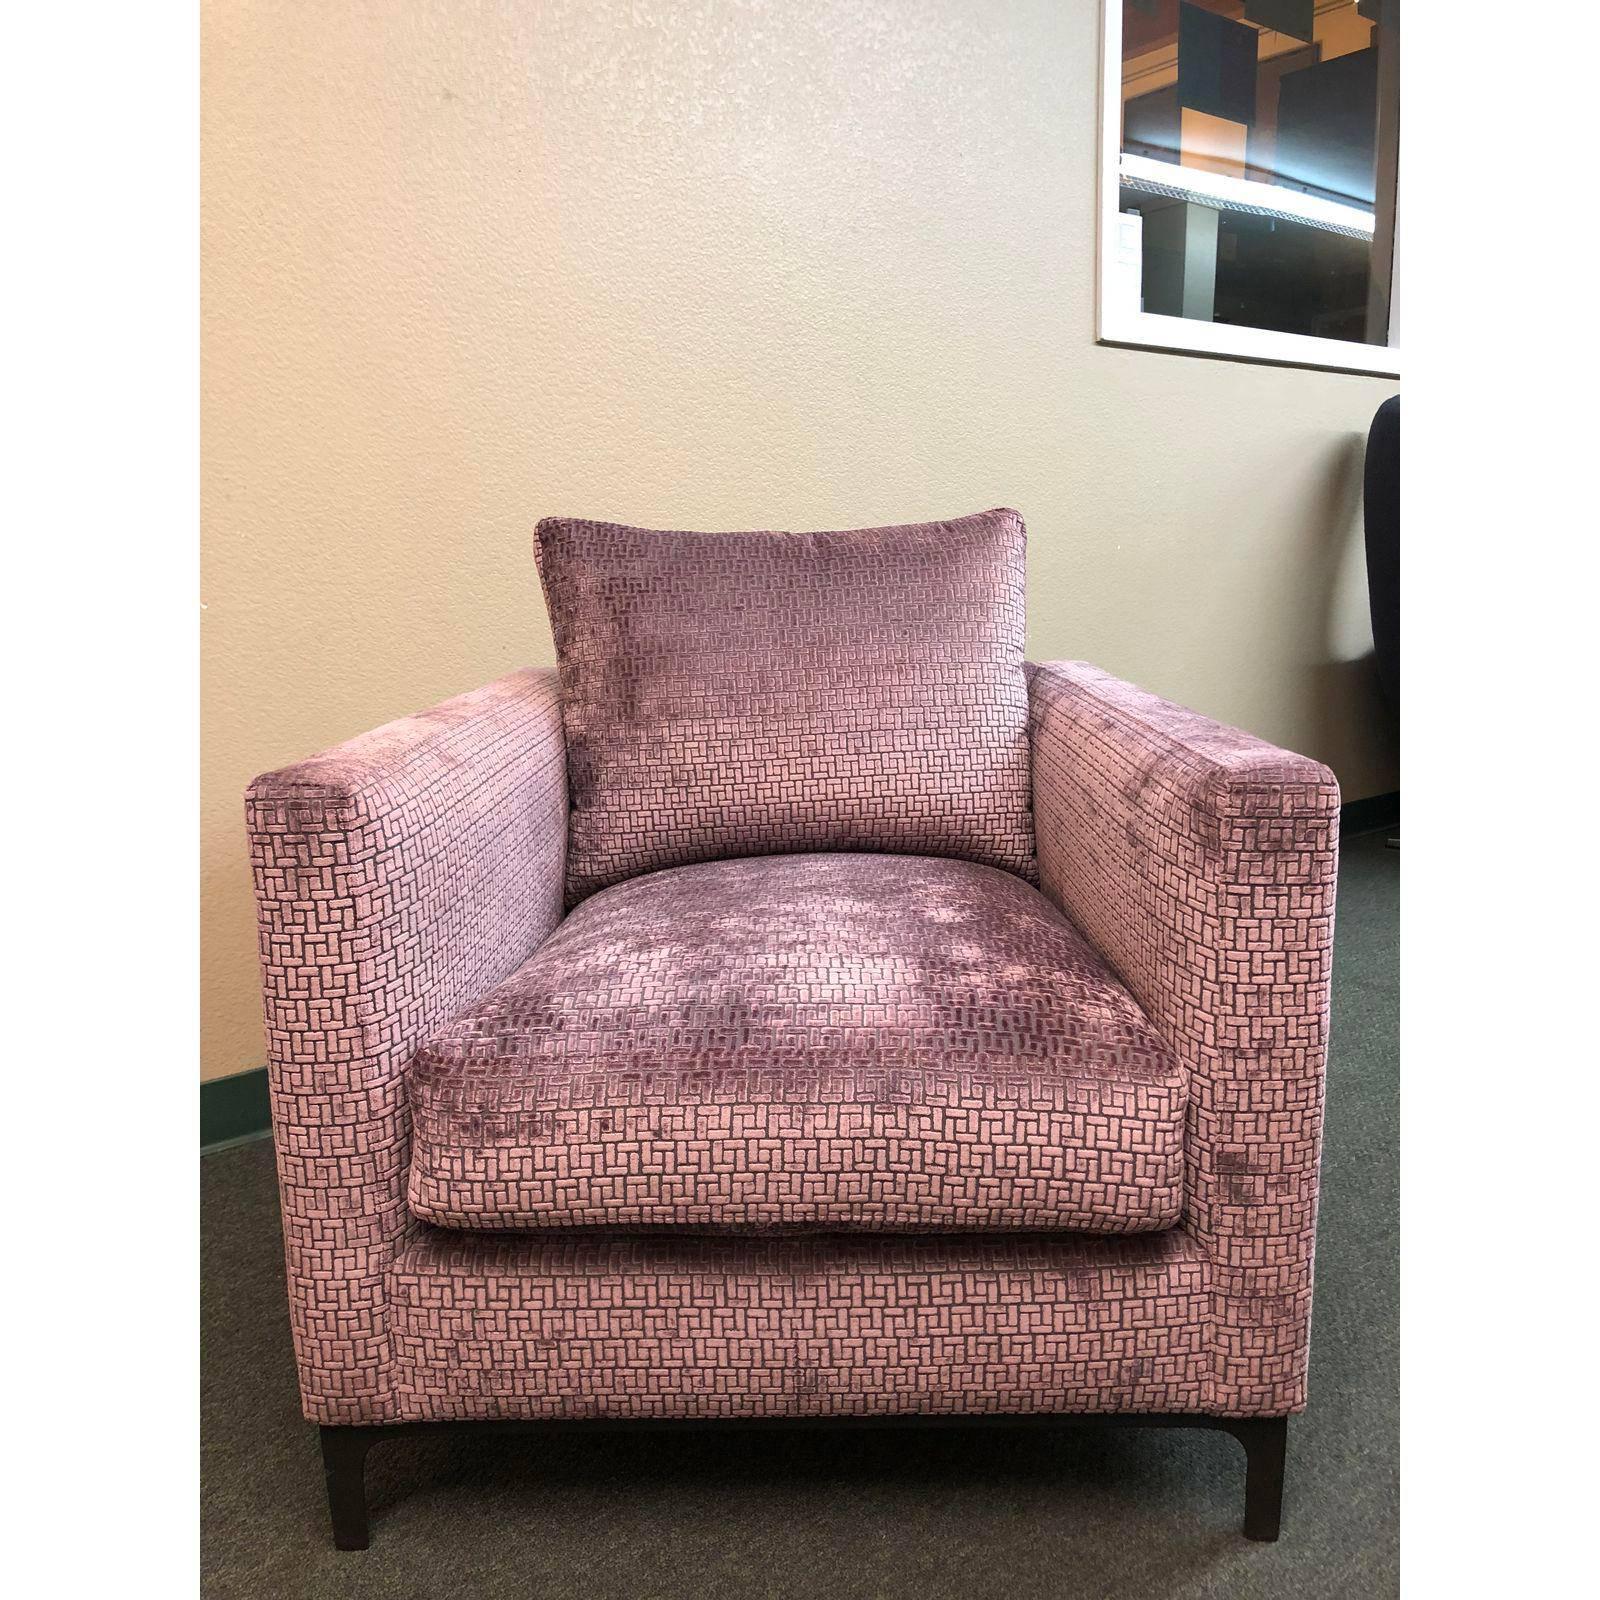 A New Jax chair by Rene Cazares. Simple lines, the patterned, plum velvet chair is oh so glamorous. The frame is engineered and constructed using hardwoods and no-sag sinuous wire springs for long wear. Seat height is 19 inches. Arm height is 28